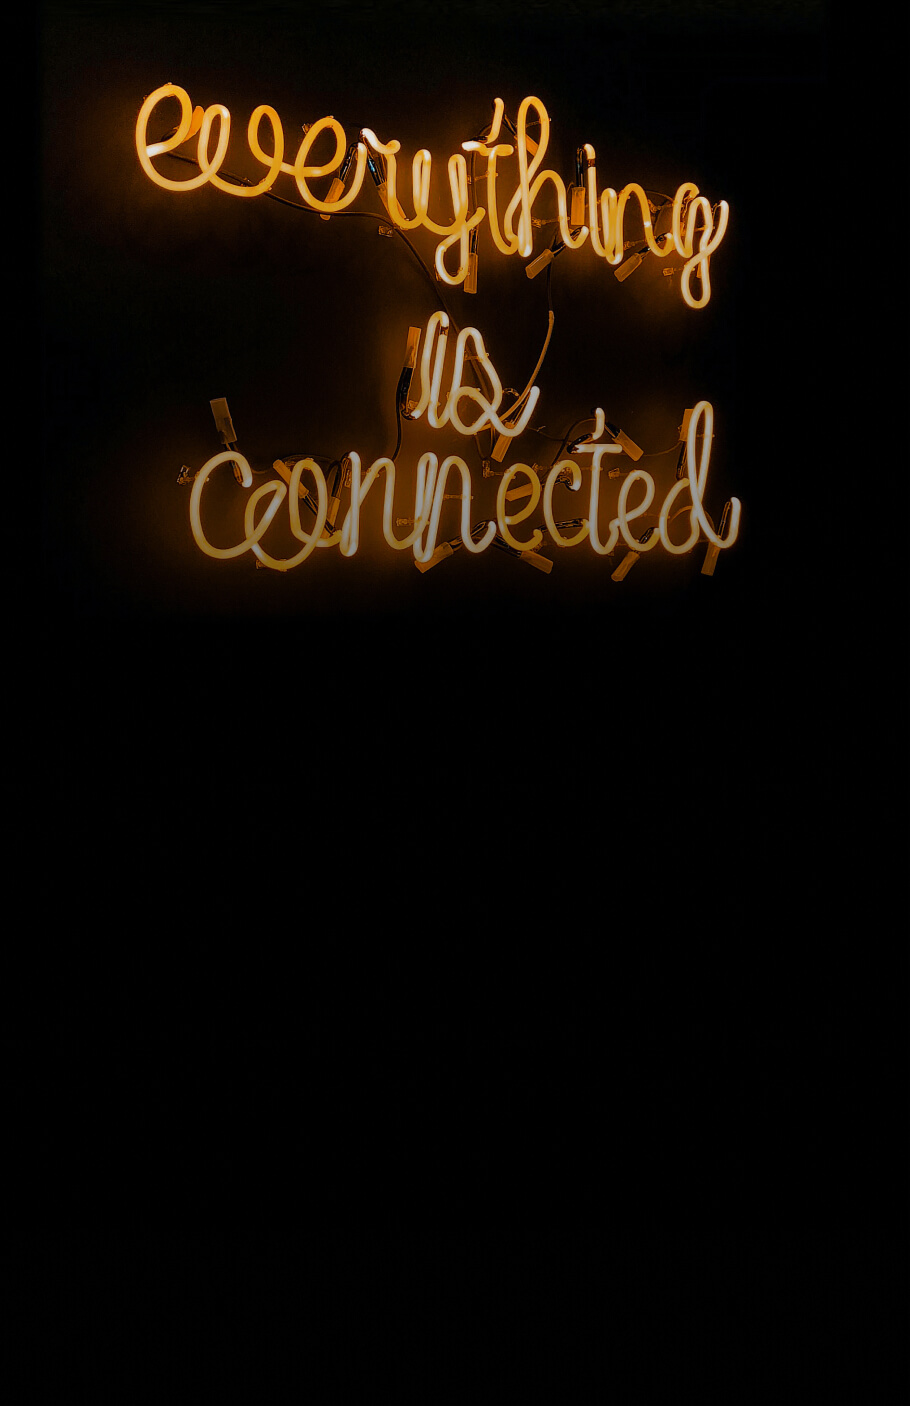  "Everything is connected" in yellow neon letters meaning that corporates will be connected to start-ups